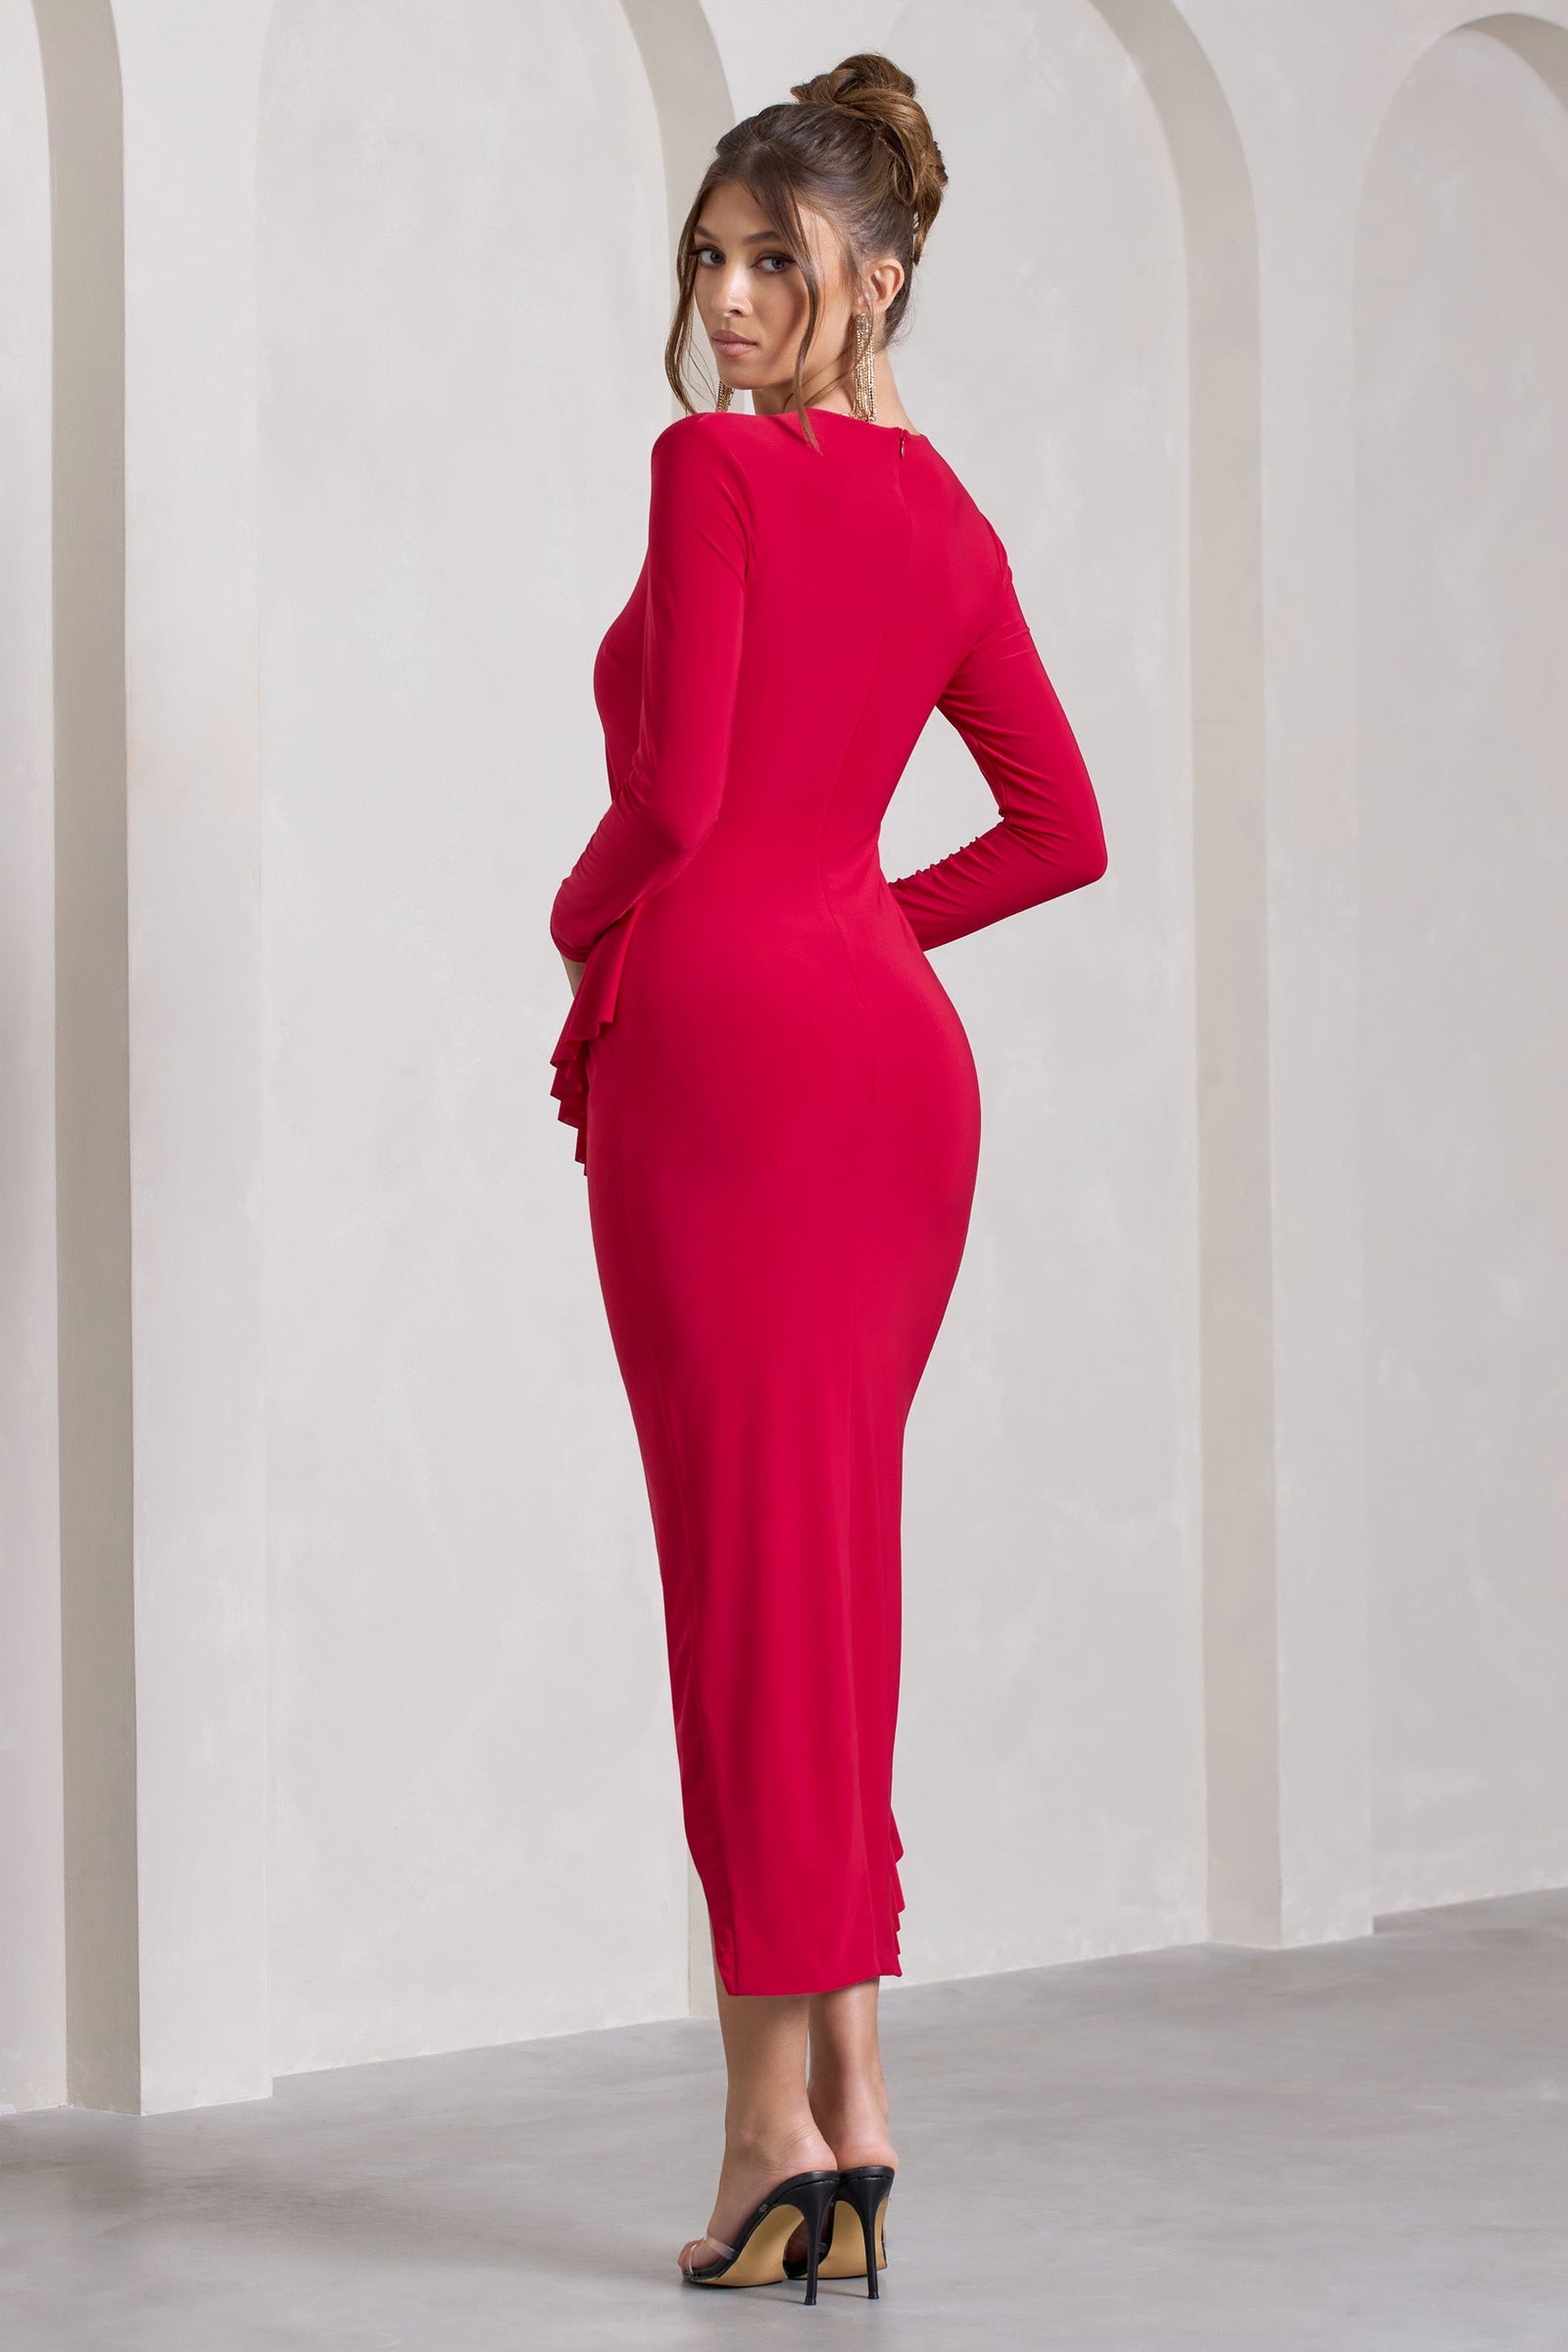 Red Bodycon Dress Outfits (66 ideas & outfits)